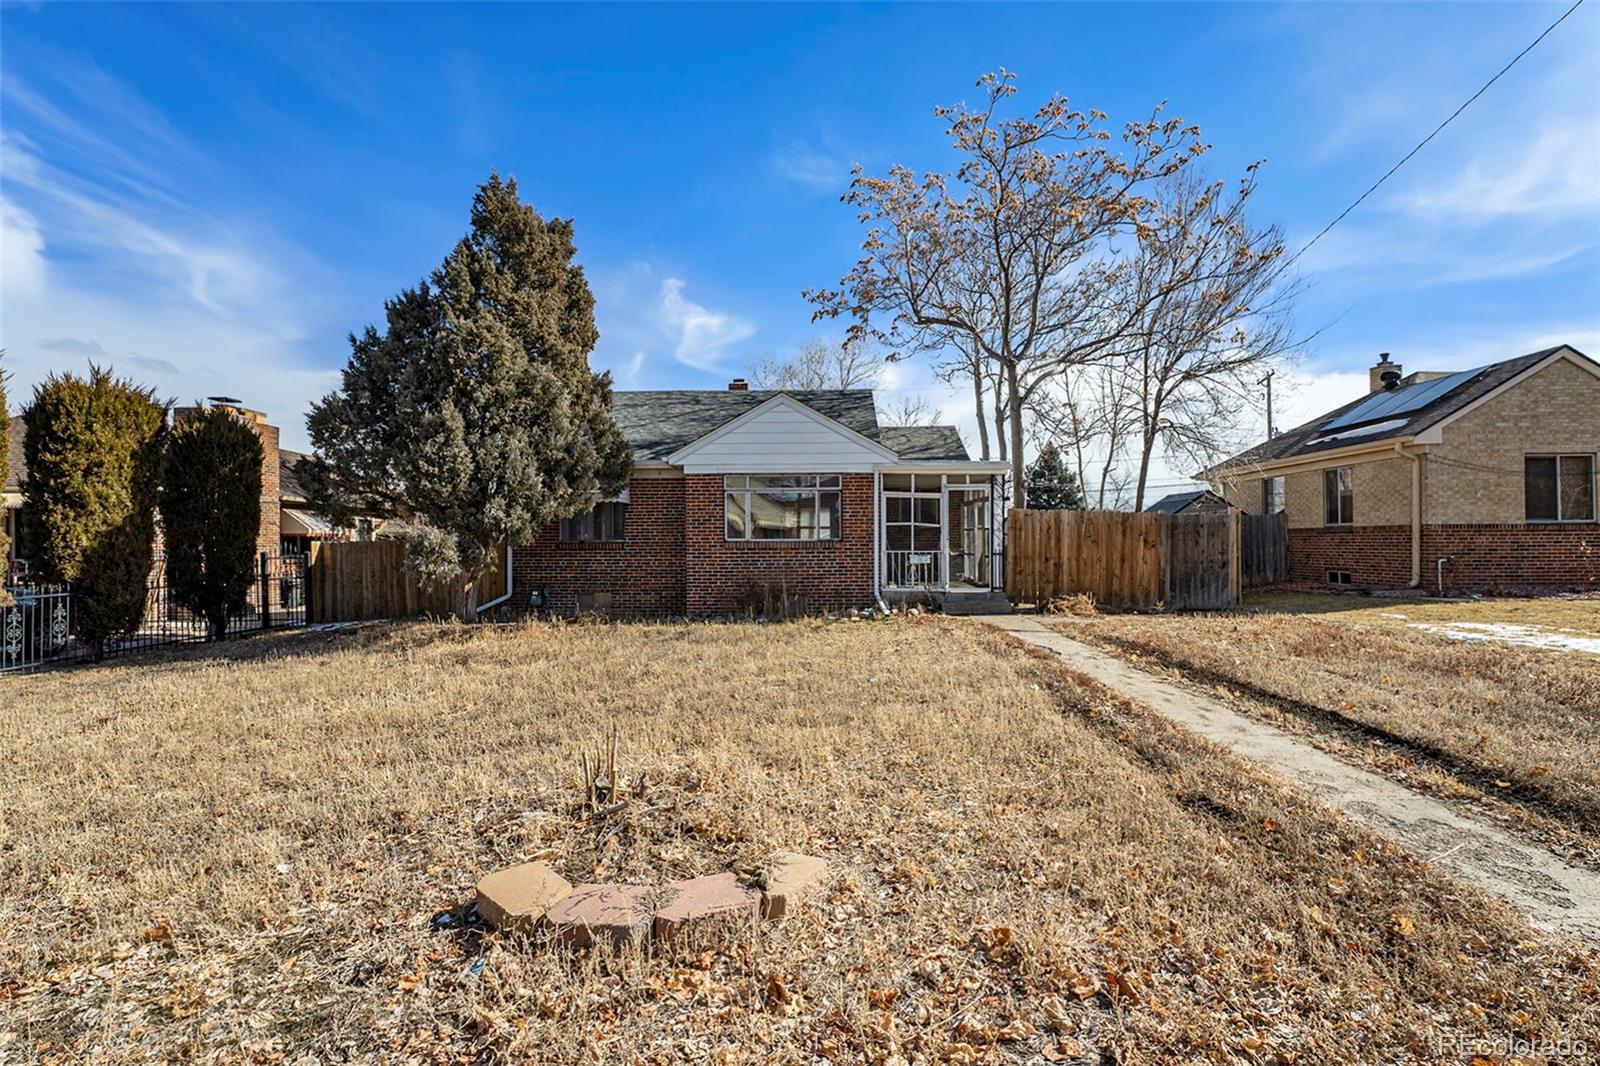 450 s decatur street, denver sold home. Closed on 2024-04-24 for $385,000.